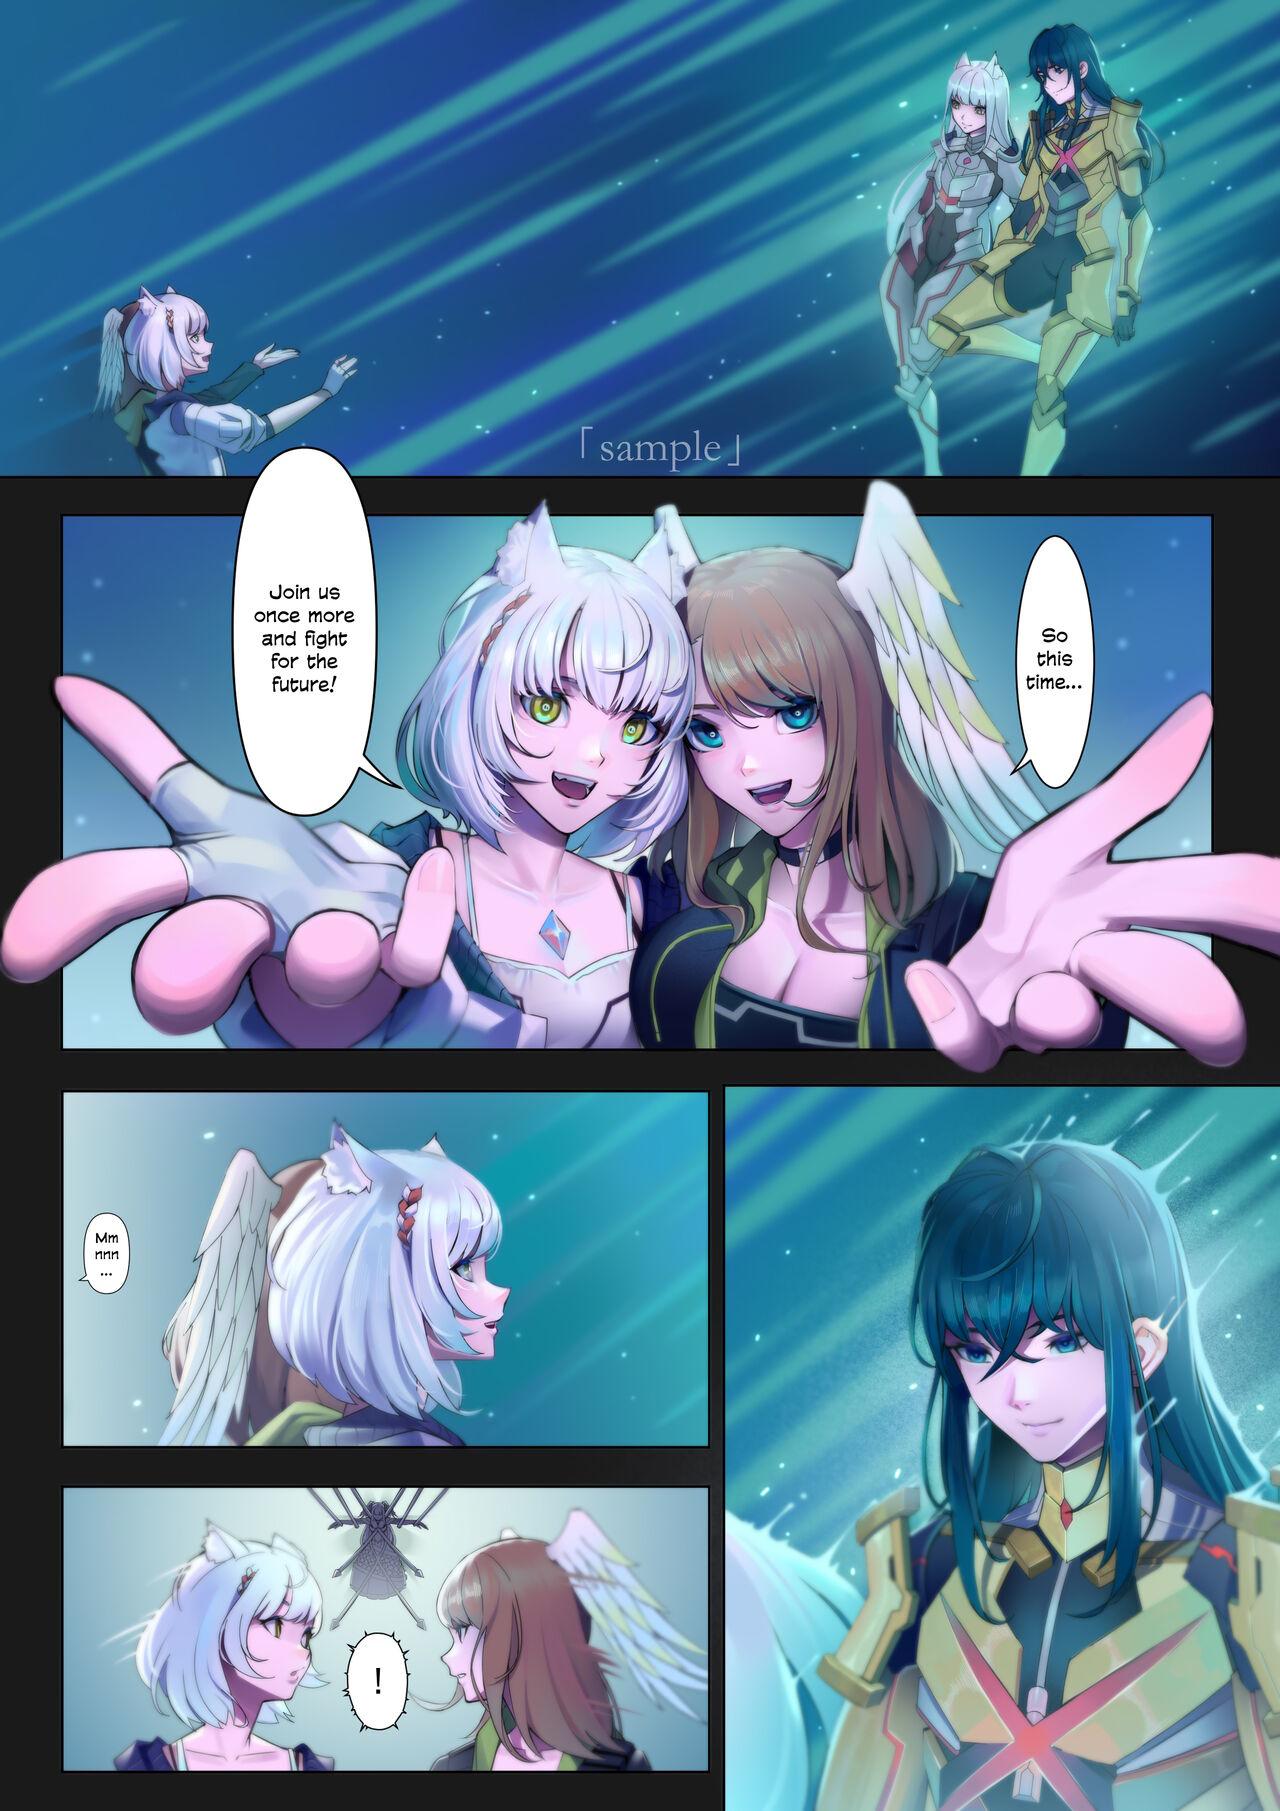 Stepmom 《Xe○blade3》Doujinshi Request - Xenoblade chronicles 3 Chilena - Picture 3